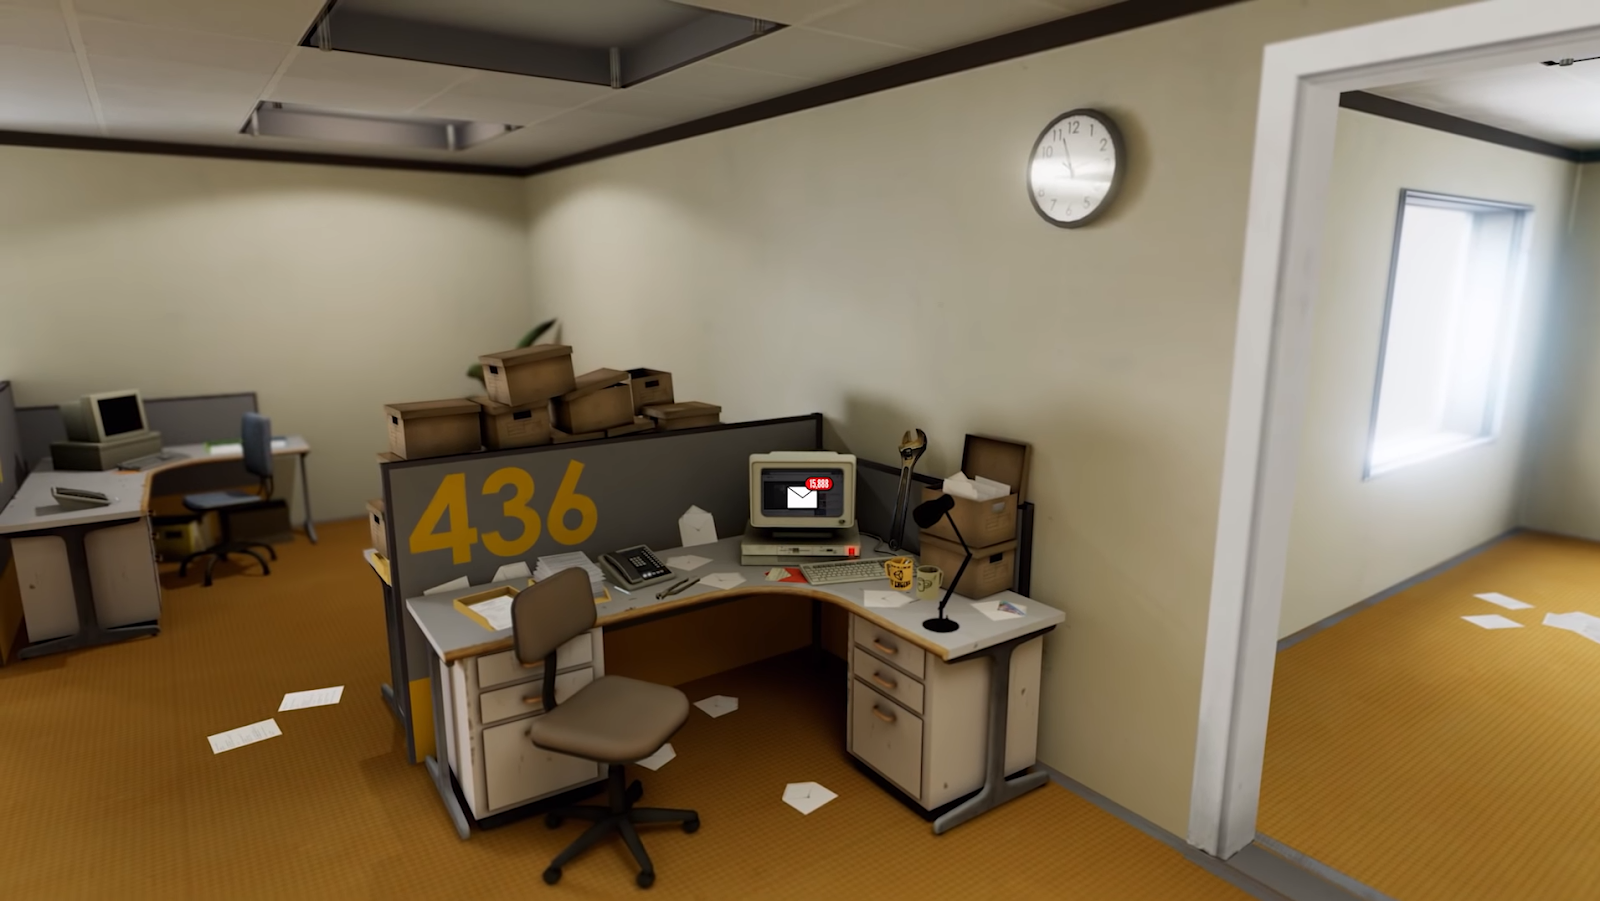 Stanley ultra deluxe. Стэнли парабл ультра Делюкс. The Stanley Parable Стэнли. Stanley Parable Deluxe. He Stanley Parable Ultra Deluxe.